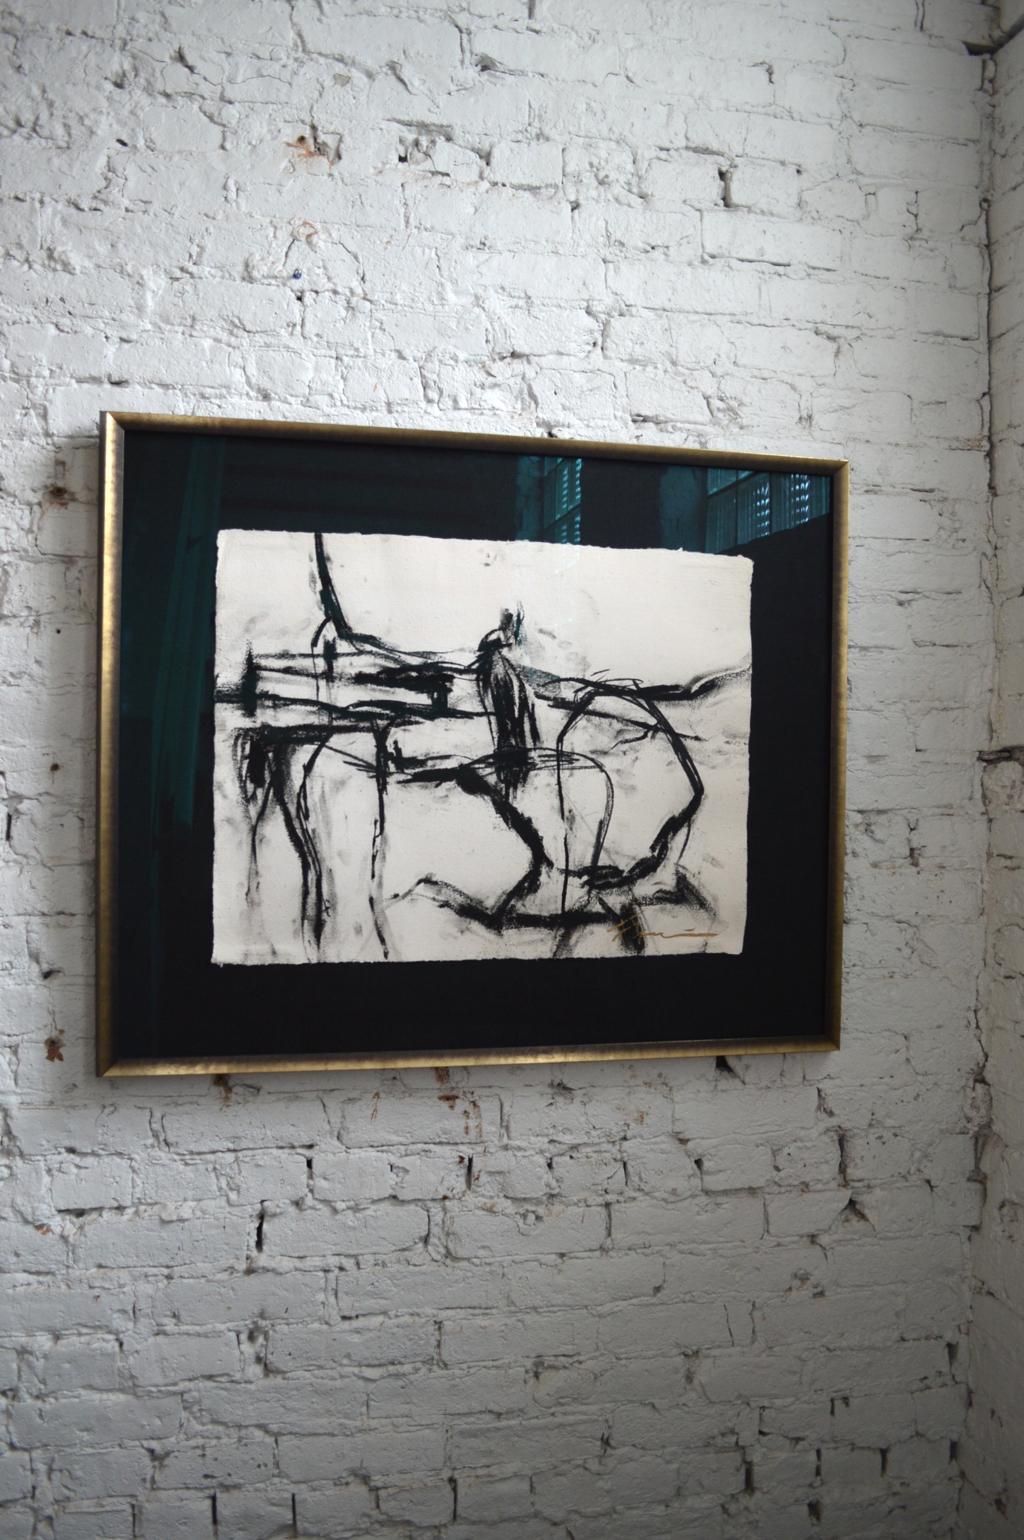 21st century signed painting by artist Francine Turk framed in custom frame.
Francine Turk is a Chicago based fine artist with an incredible roster of collectors. She is most known for her work in charcoal nudes which were featured in the movie